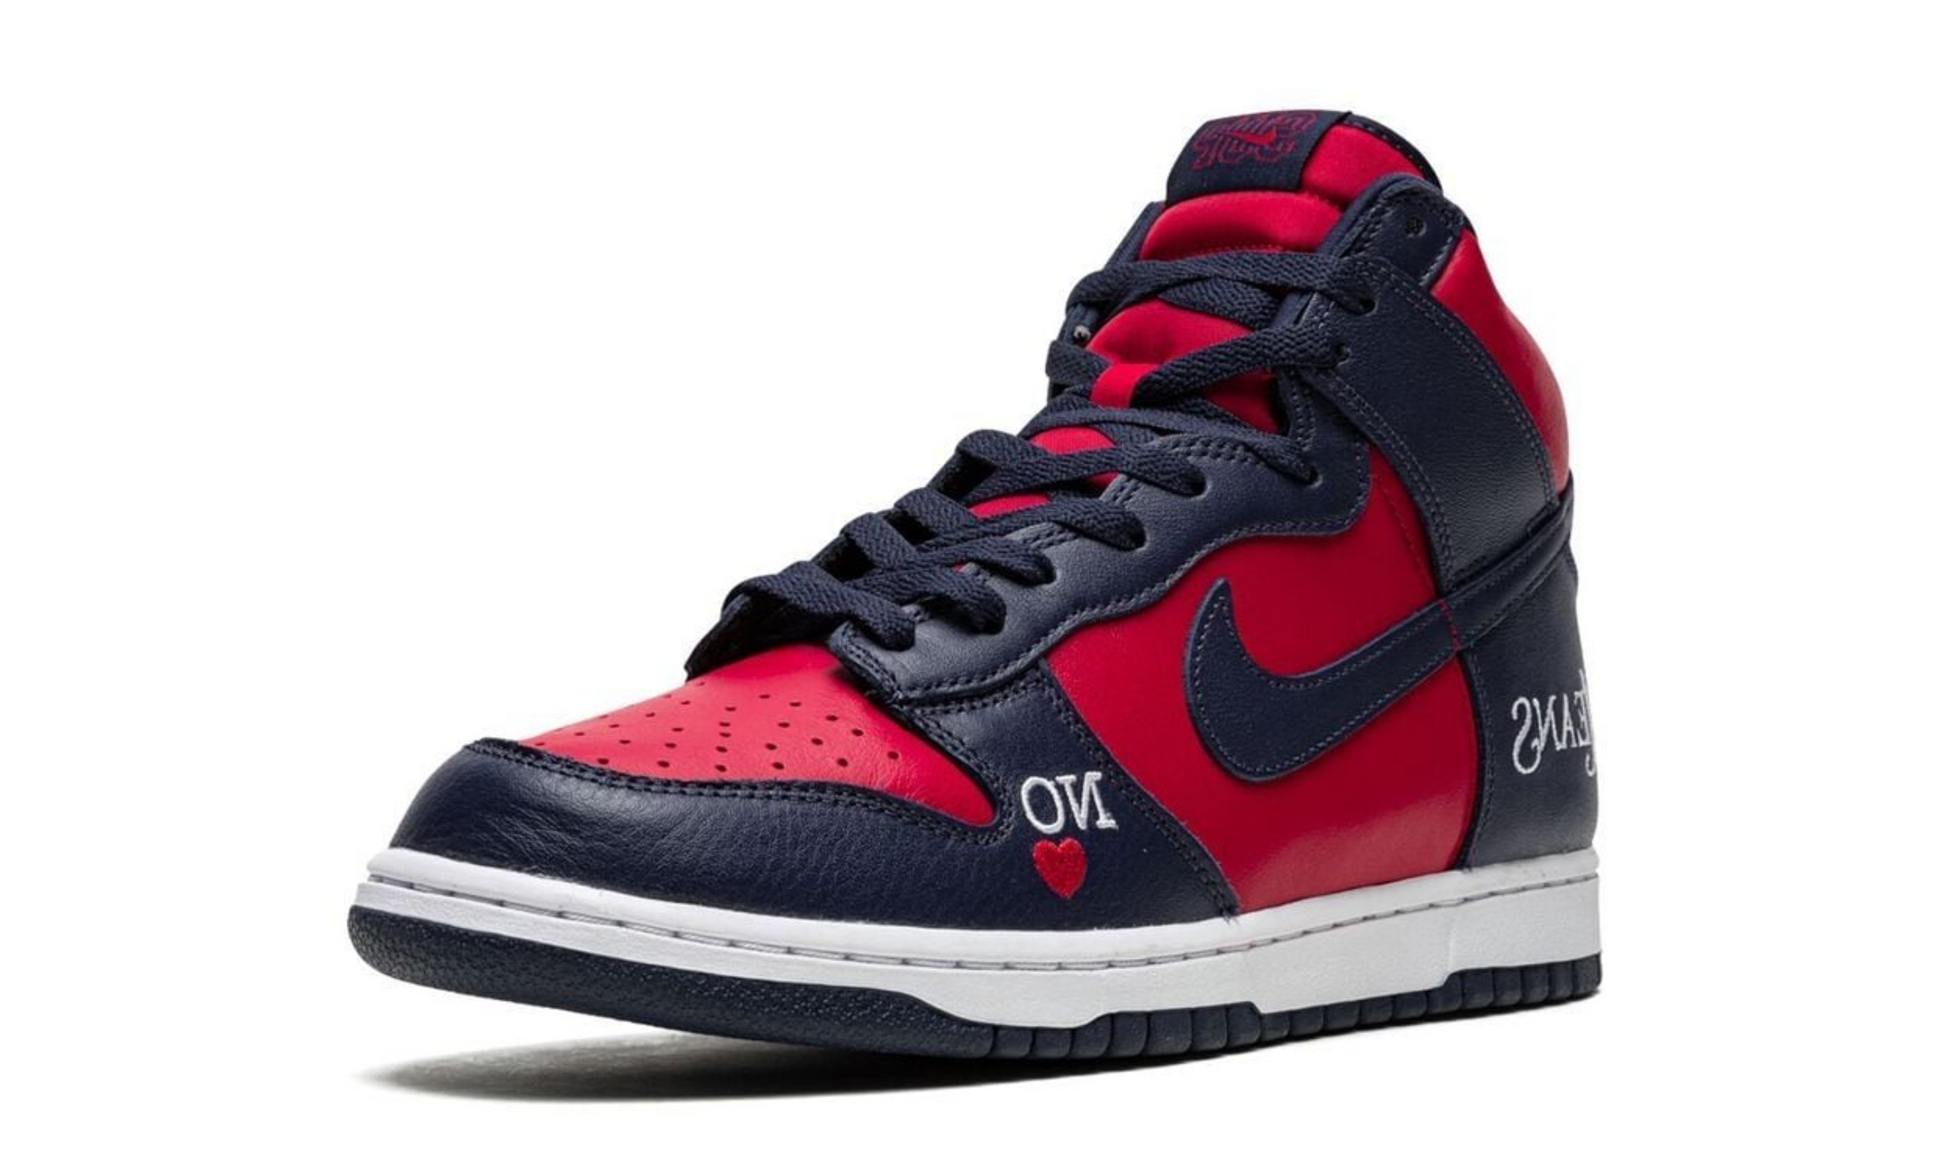 Nike SB Dunk High Supreme By Any Means Navy Red